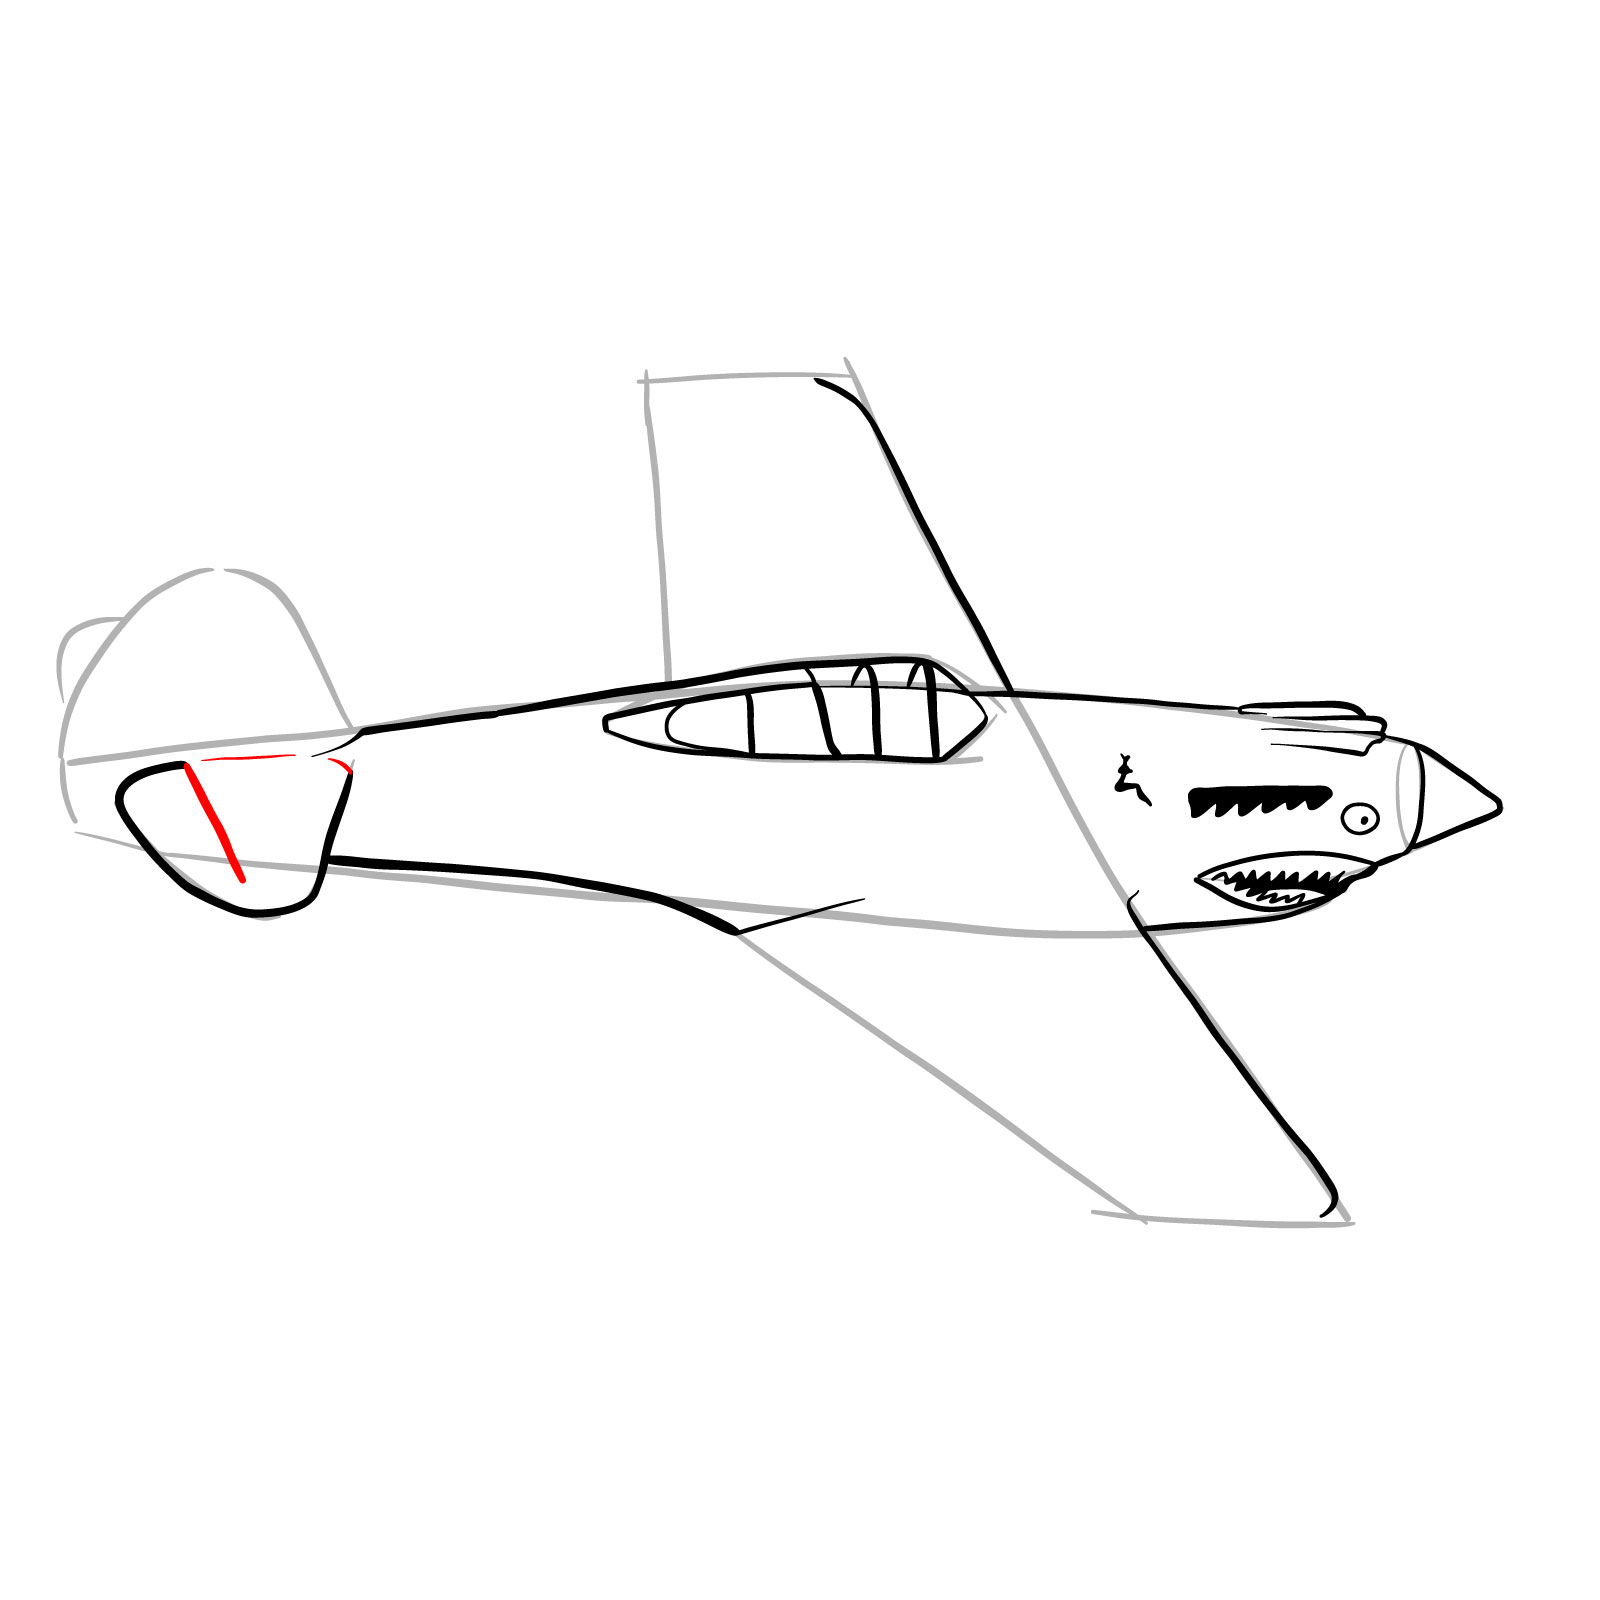 How to draw a P-40 Flying Tiger - step 18